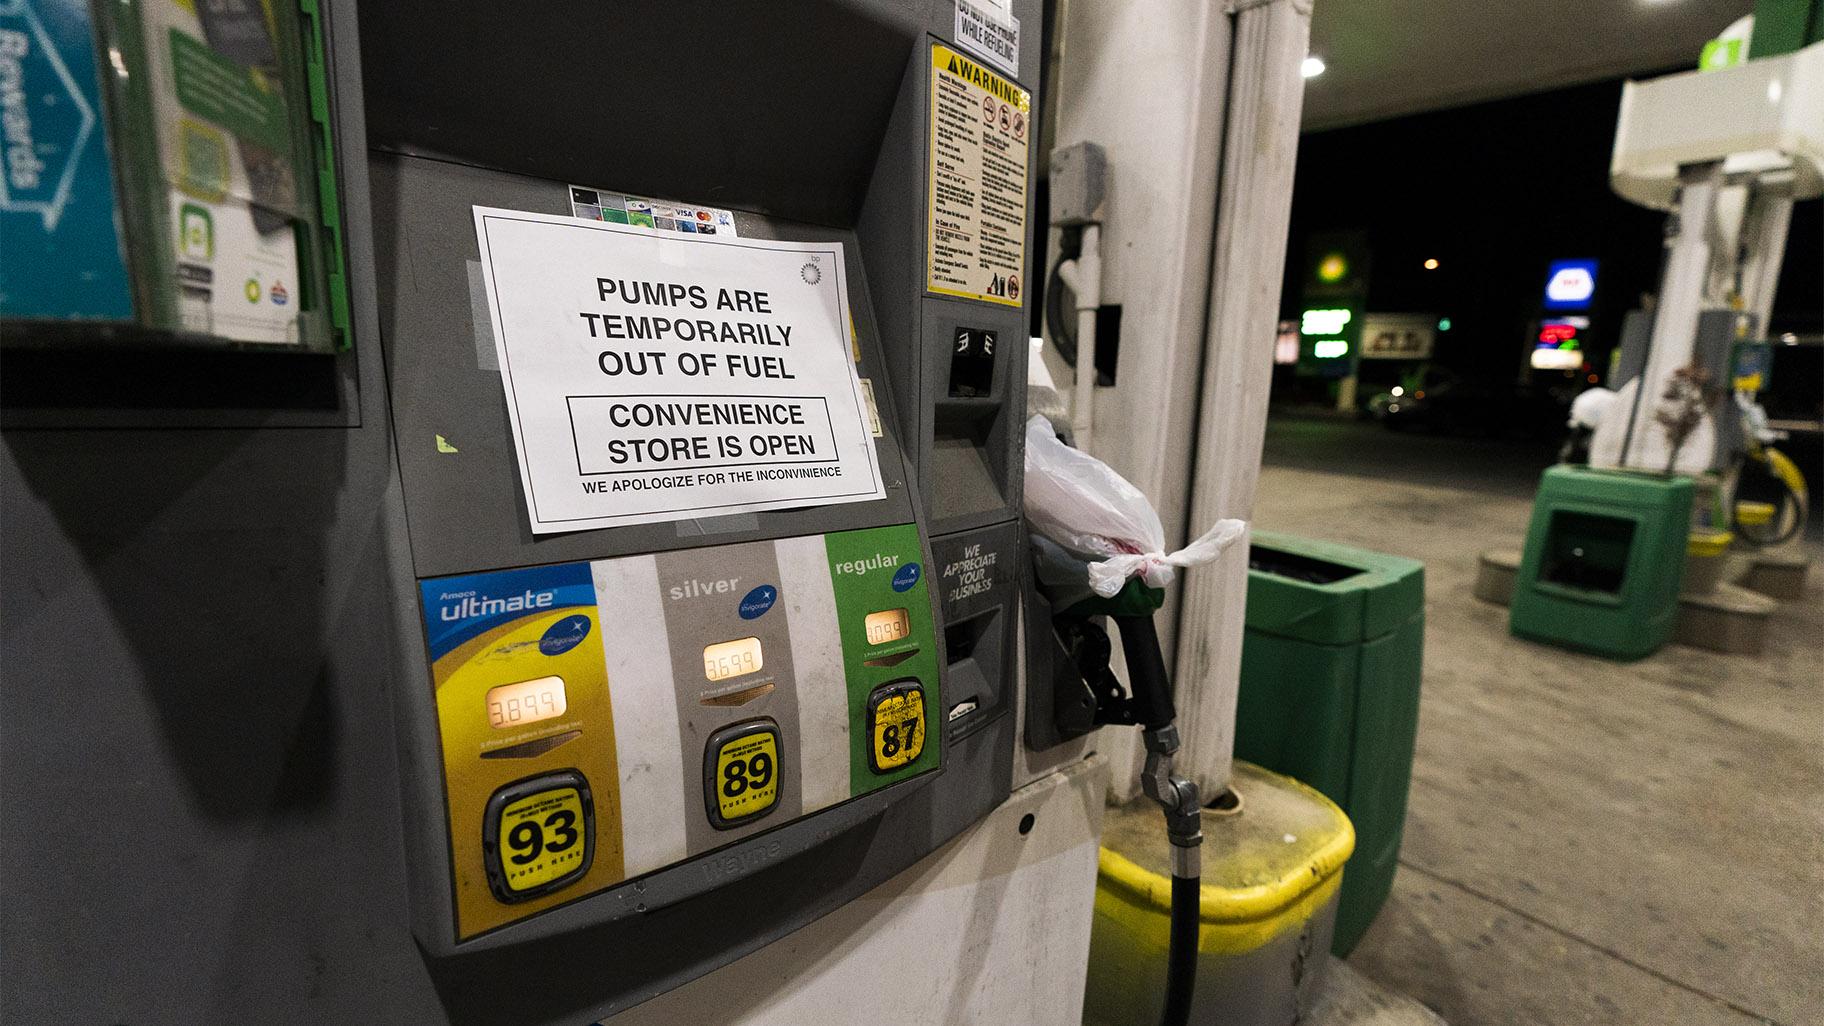 A pump at a gas station in Silver Spring, Md., is out of service, notifying customers they are out of fuel, Thursday, May 13, 2021. (AP Photo / Manuel Balce Ceneta)